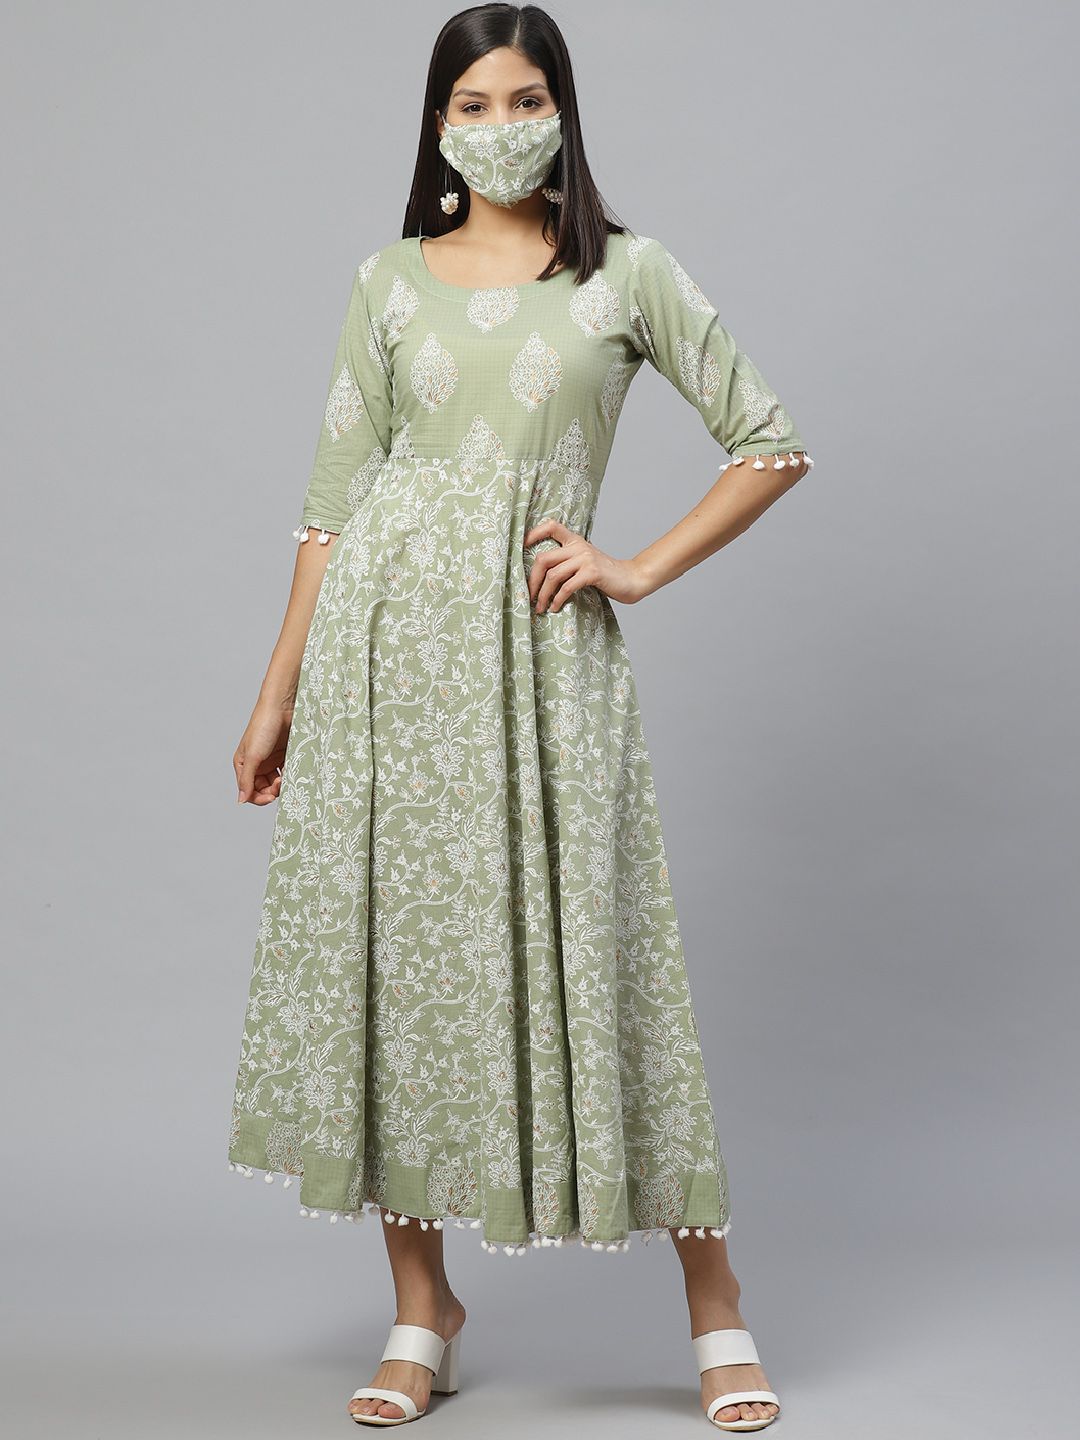 Libas Sage Green & Off-White Ethnic Motifs Printed Maxi Cotton Dress With Mask Price in India